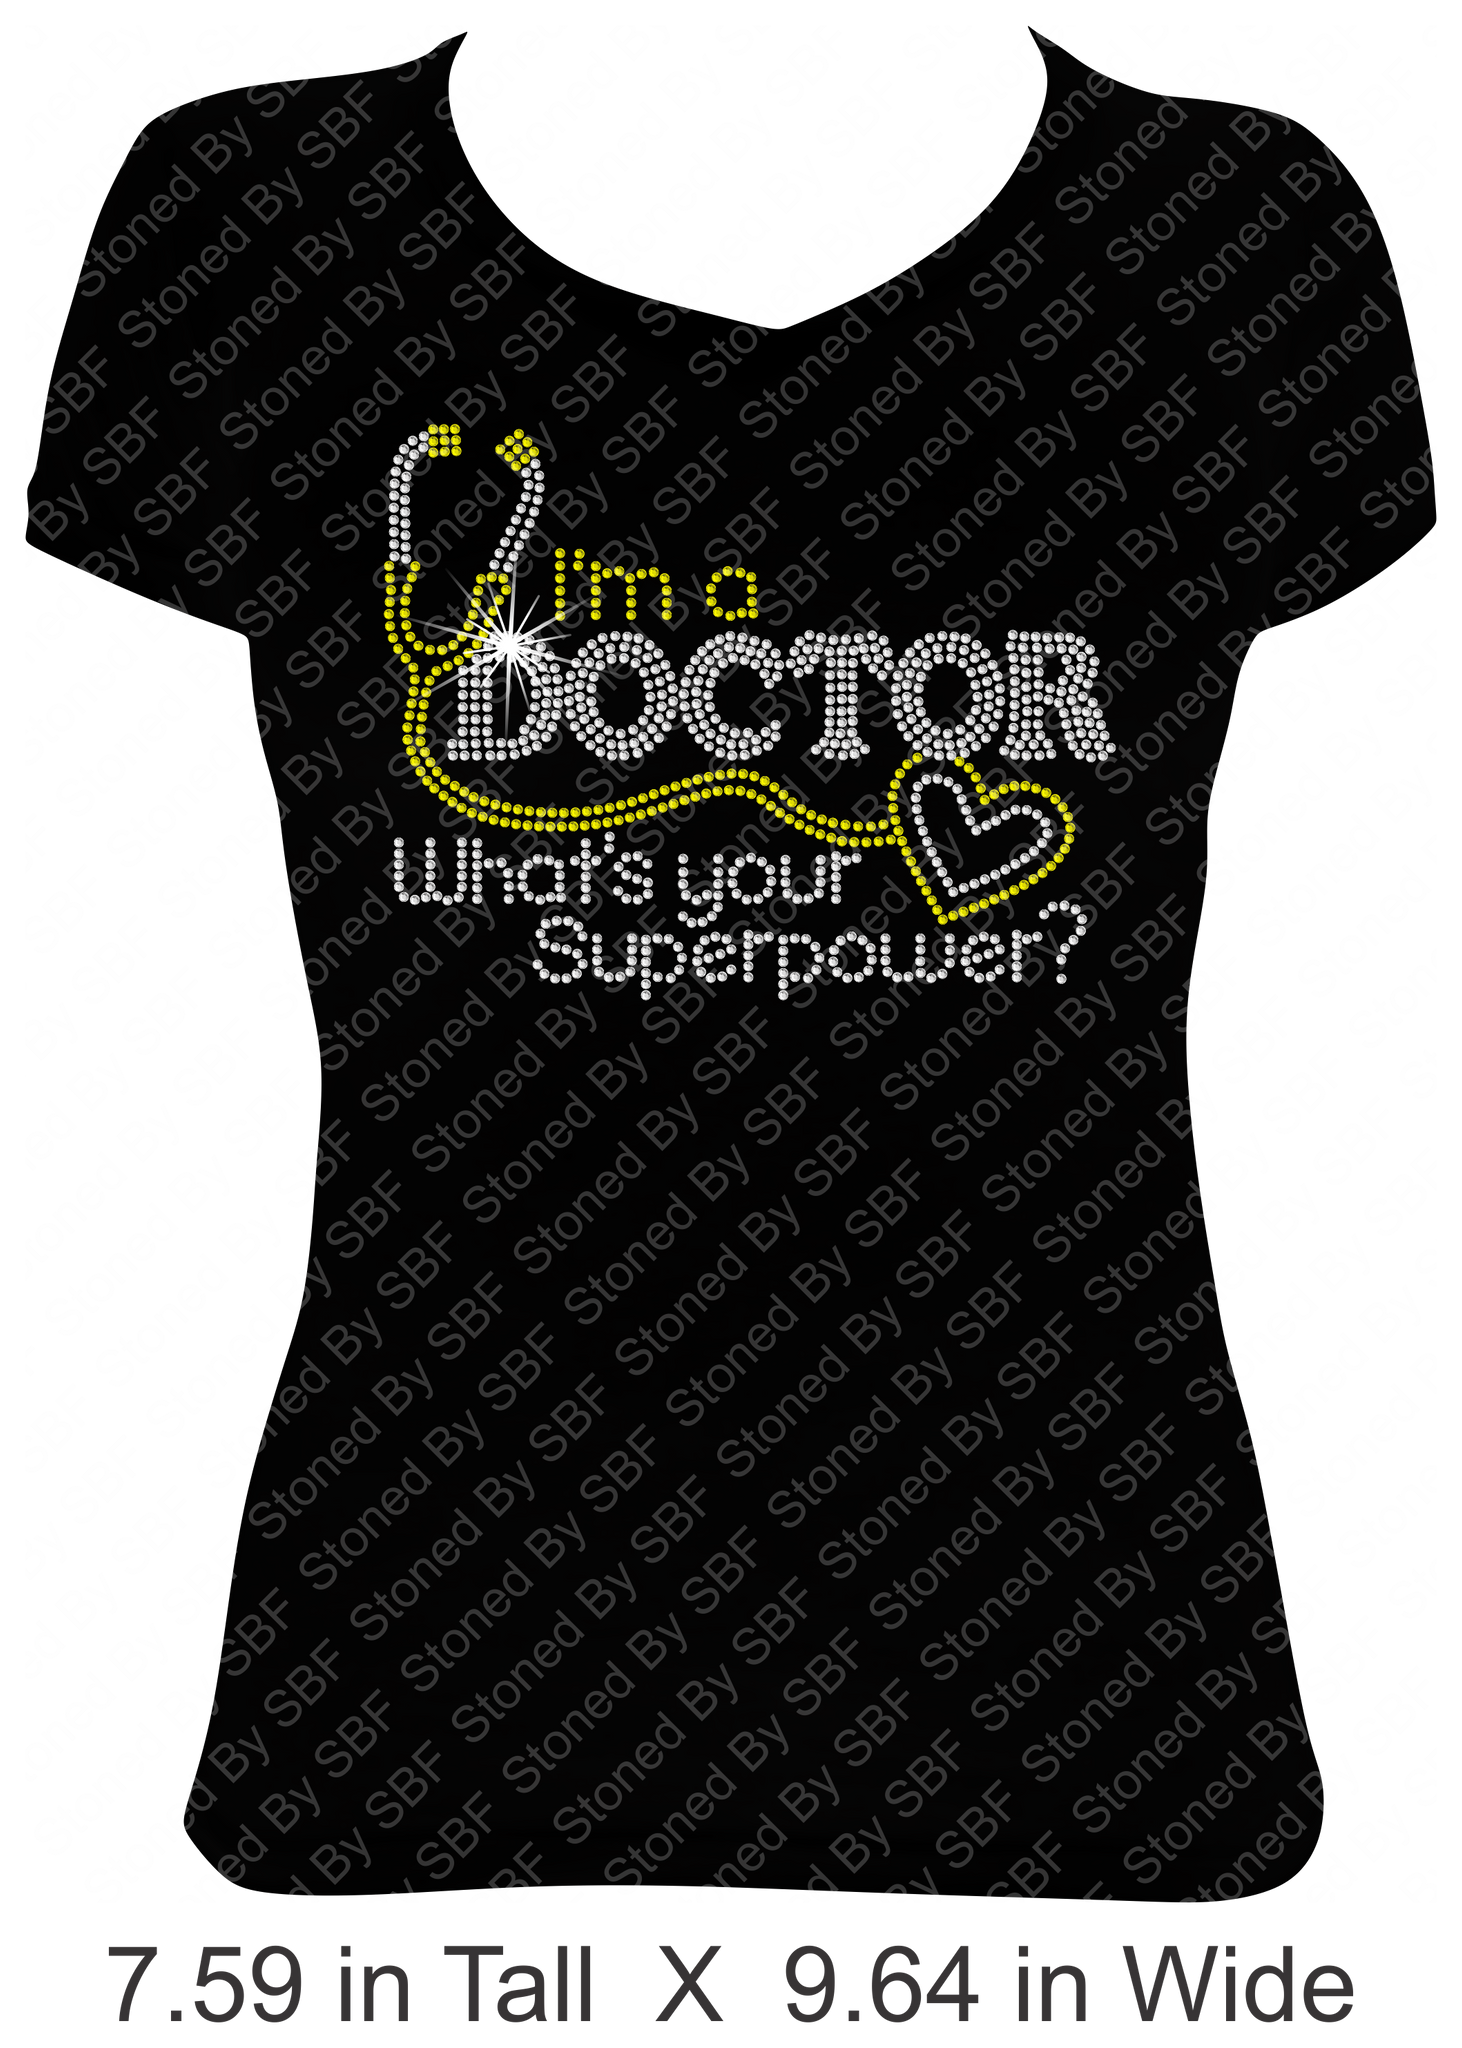 I'm a Doctor What's Your Superpower?